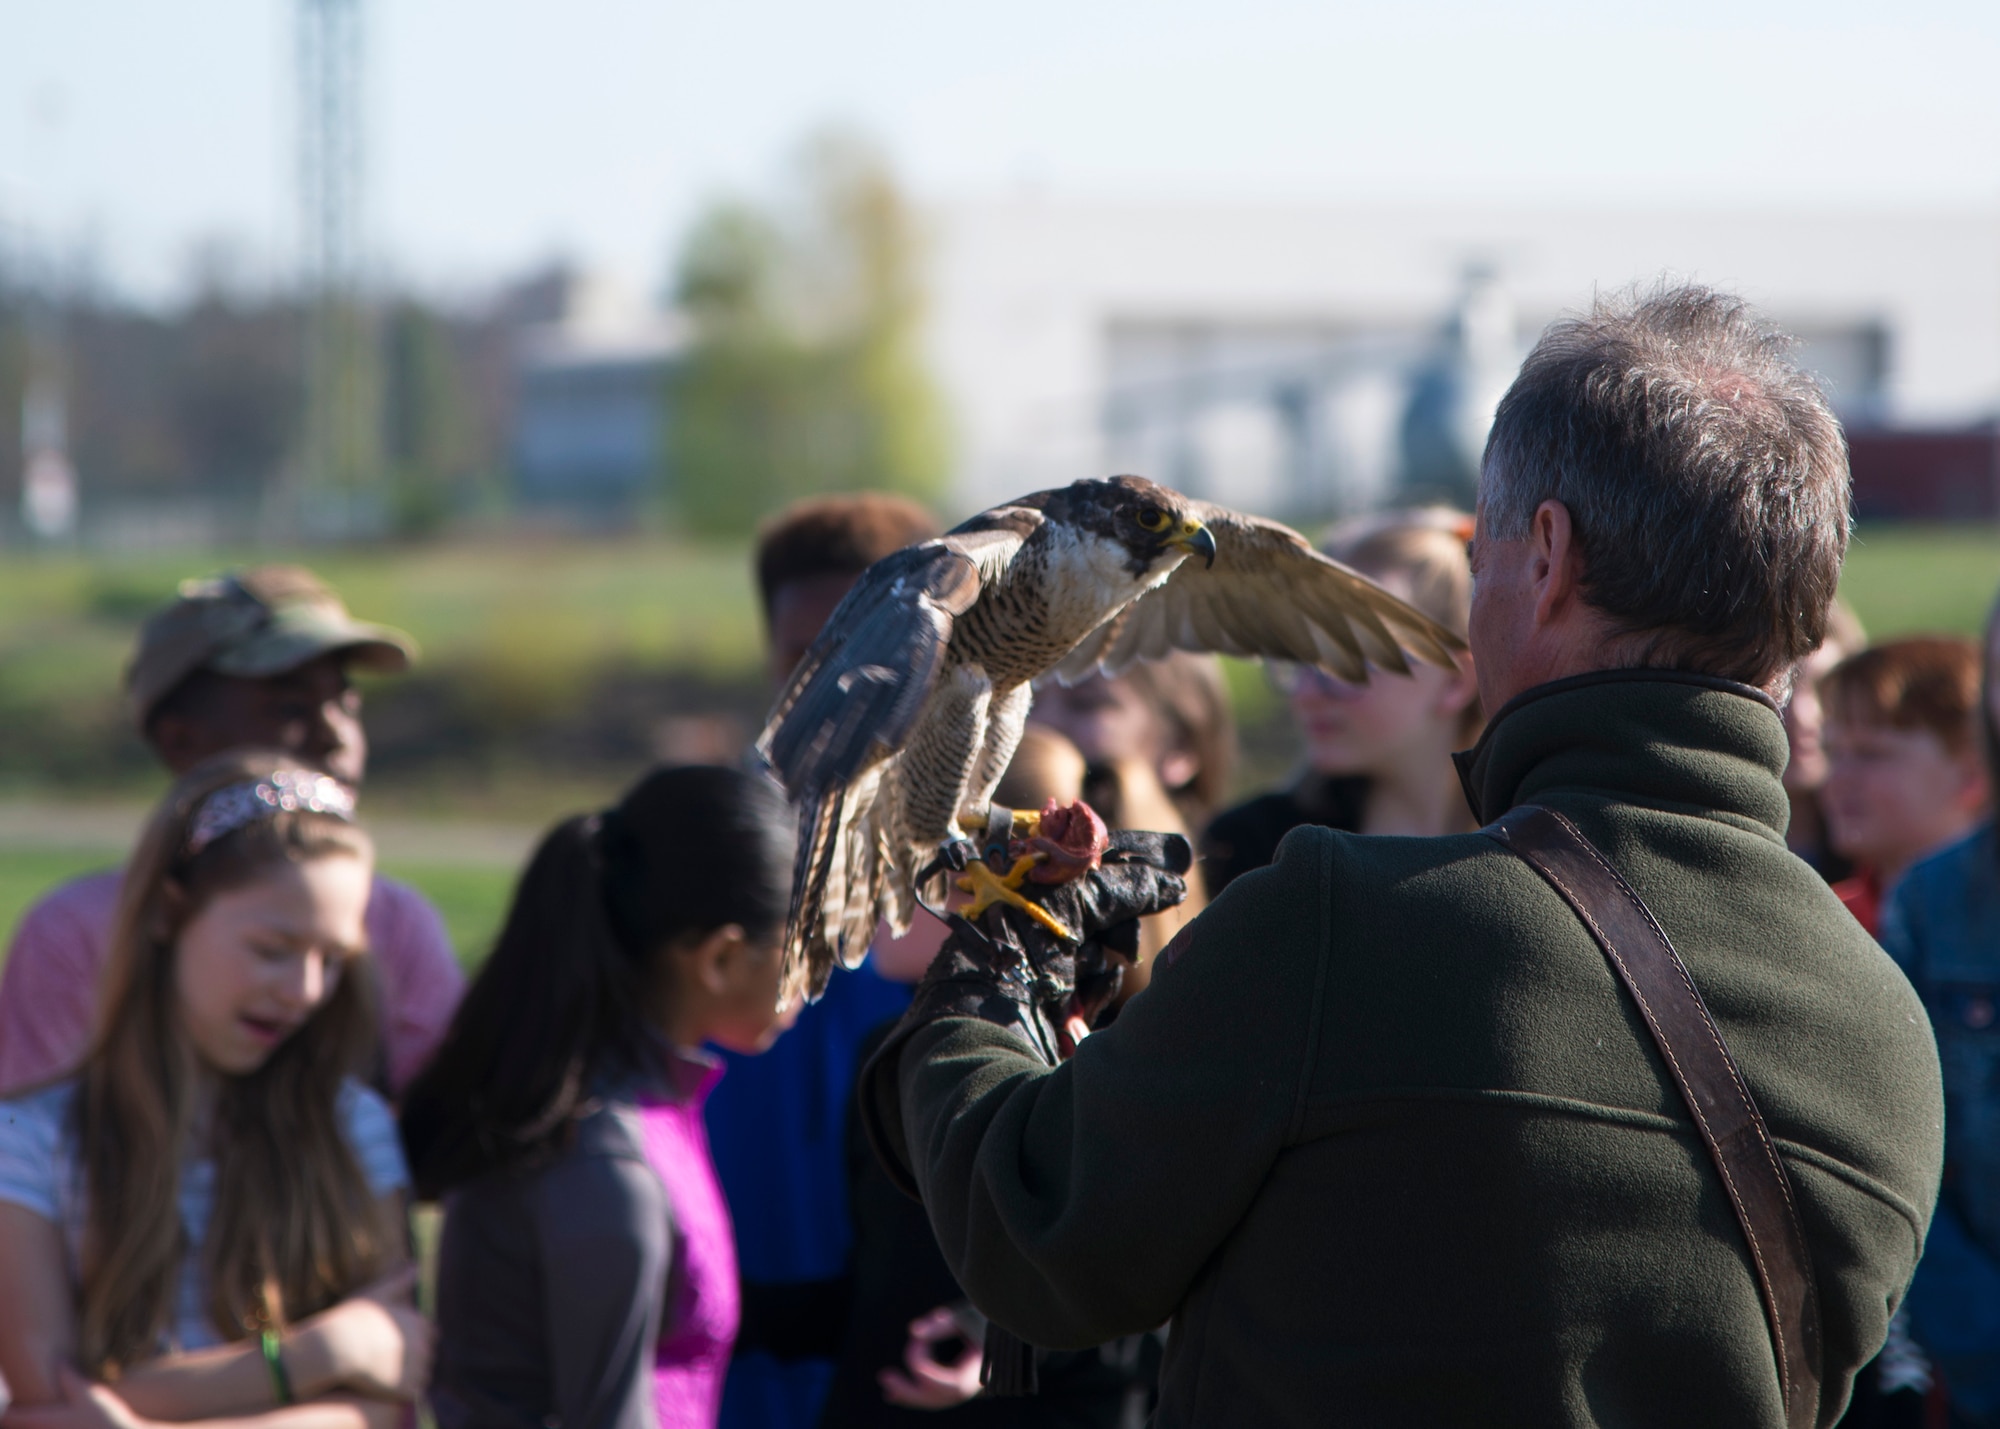 A peregrine falcon perches on its handler as part of an Earth Day demonstration on Ramstein Air Base, Germany, April 17, 2018.